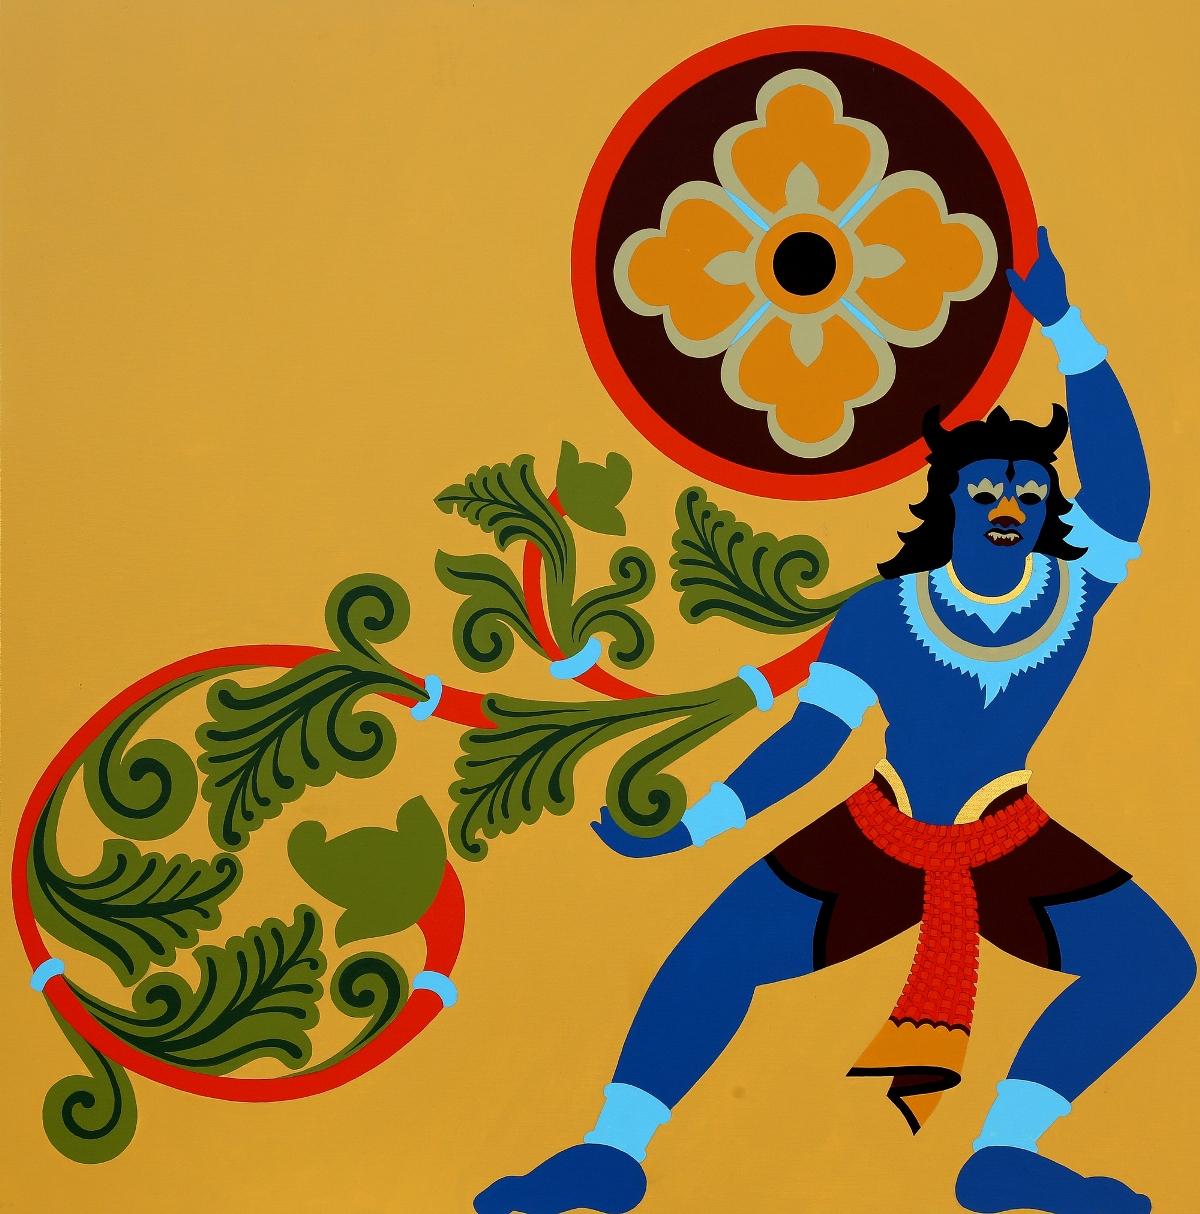 Mukesh Sharma Figurative Painting - Asur, Acrylic, Gold Leaf on Canvas by Contemporary Artist "In Stock"